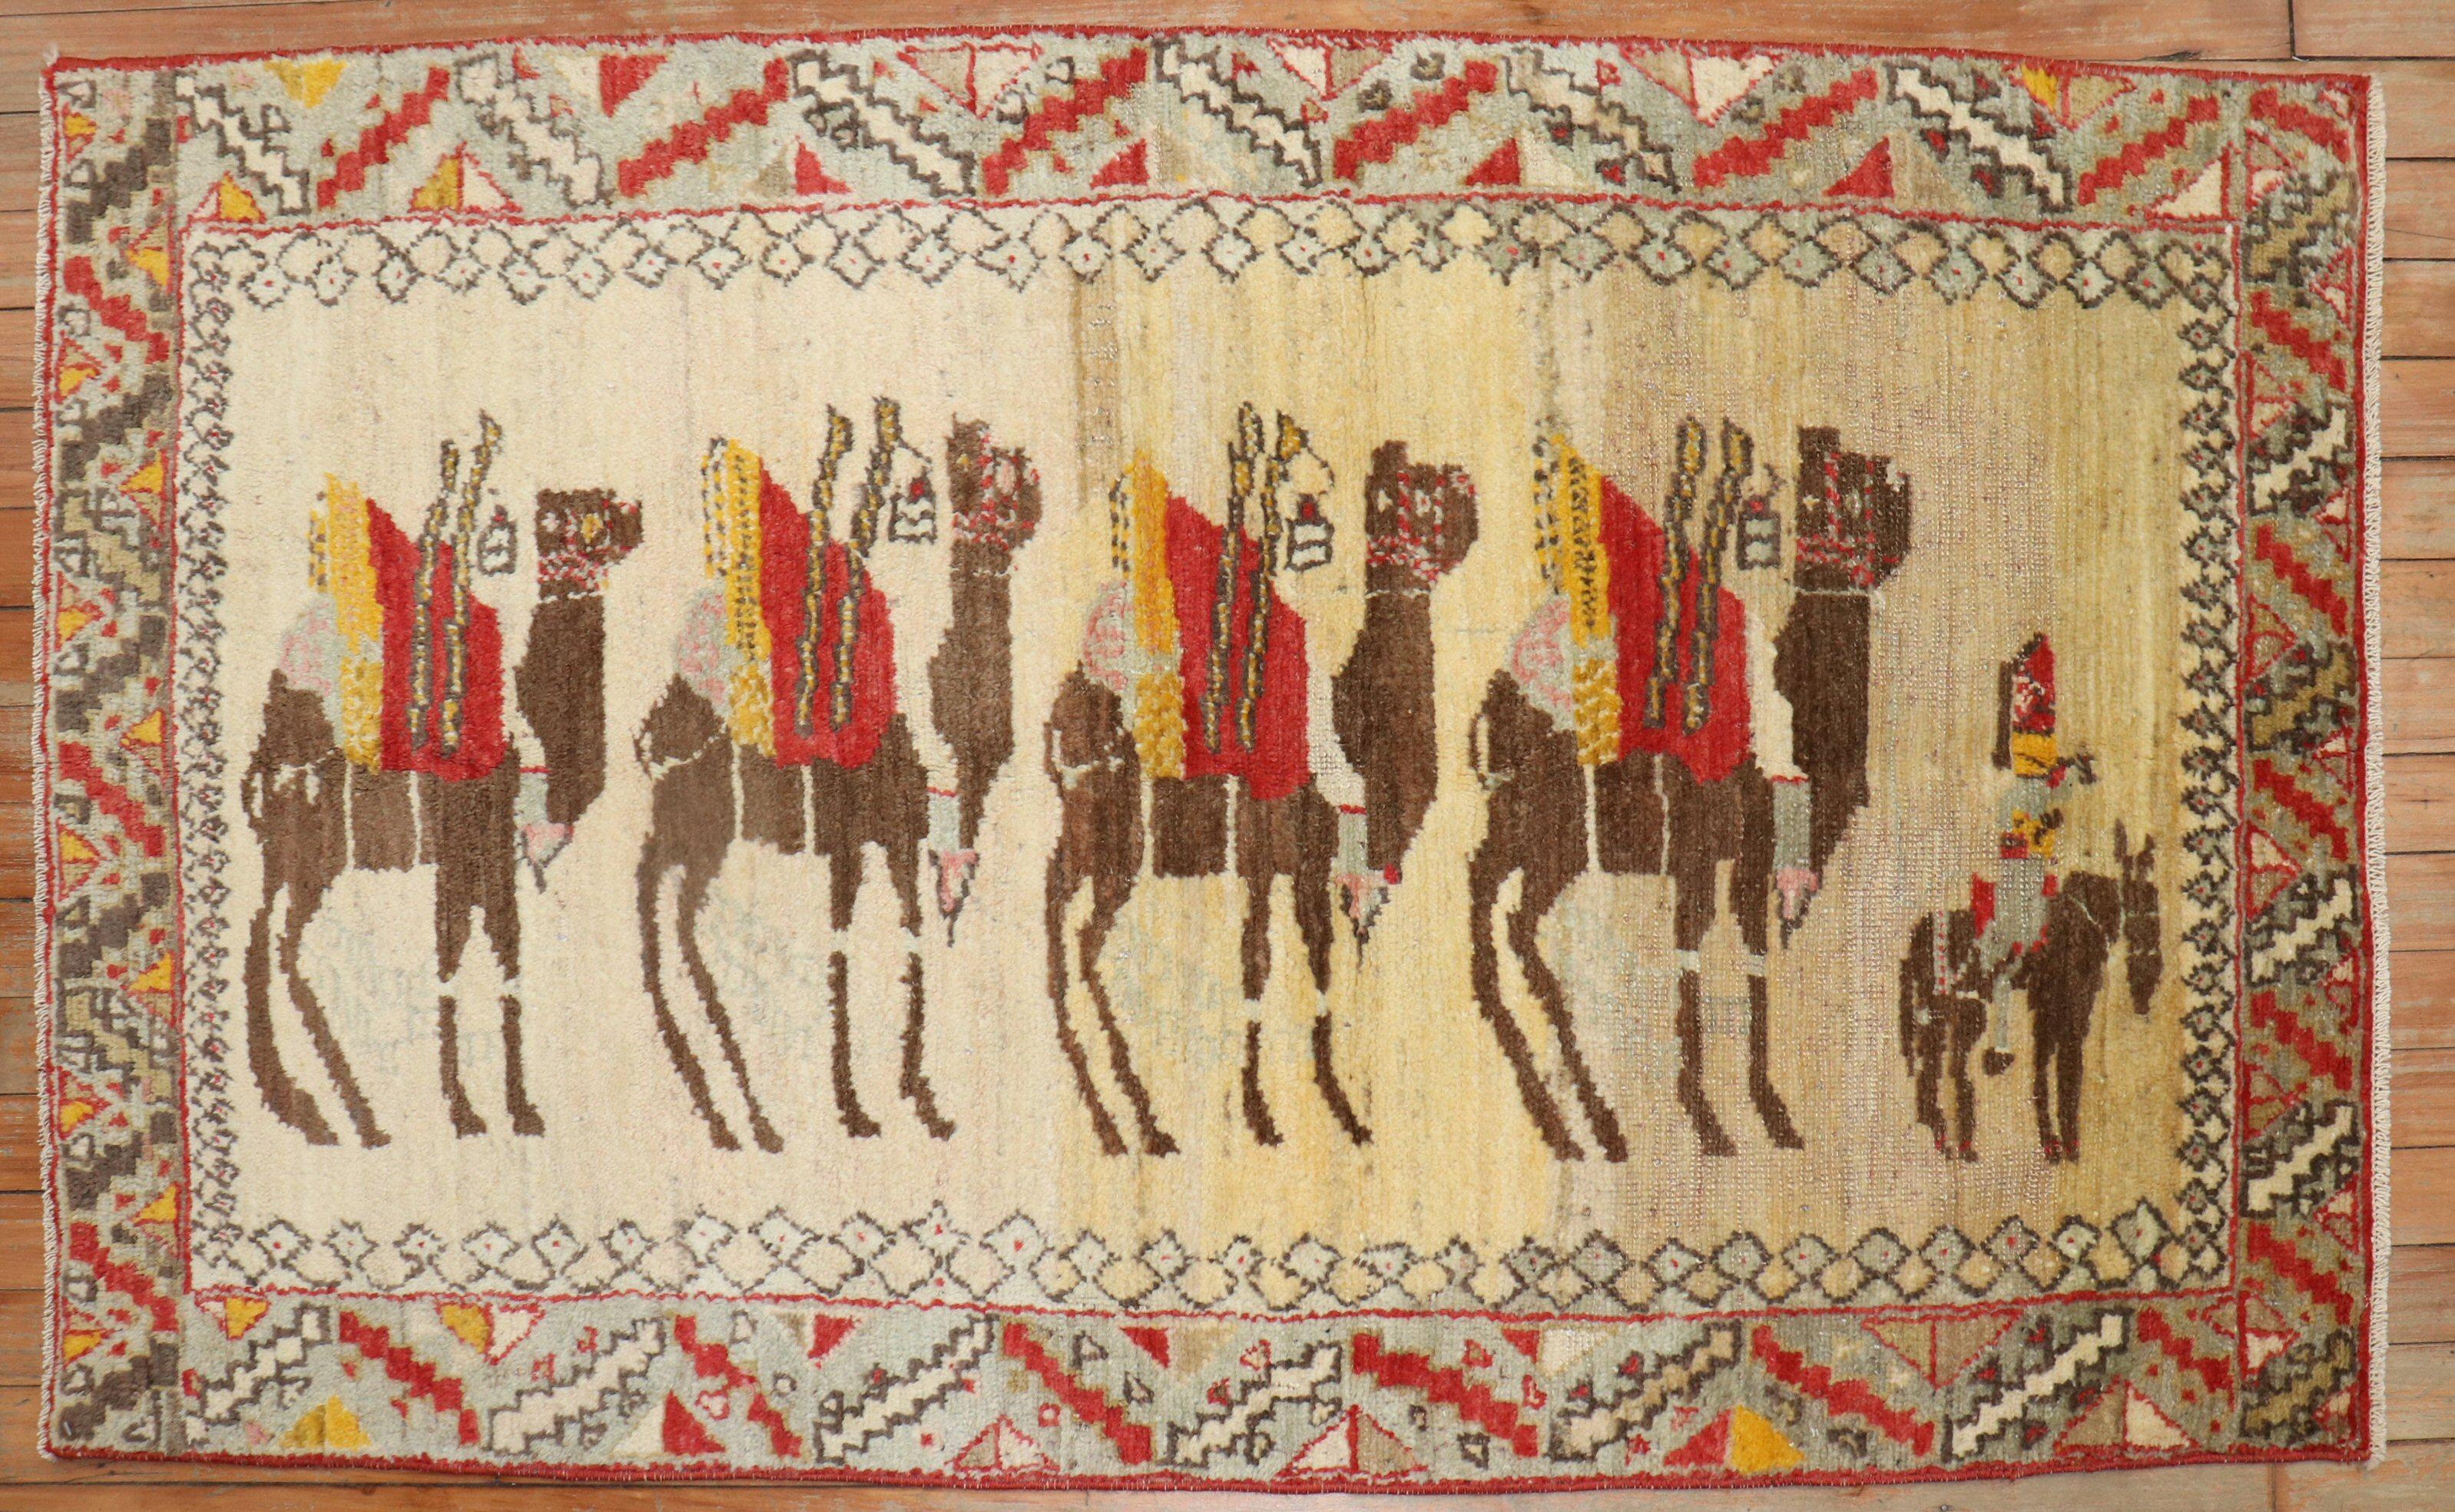 Mid 20th century Turkish Anatolian rug with a pictorial donkey design

Size: 2'9'' x 4'9''.